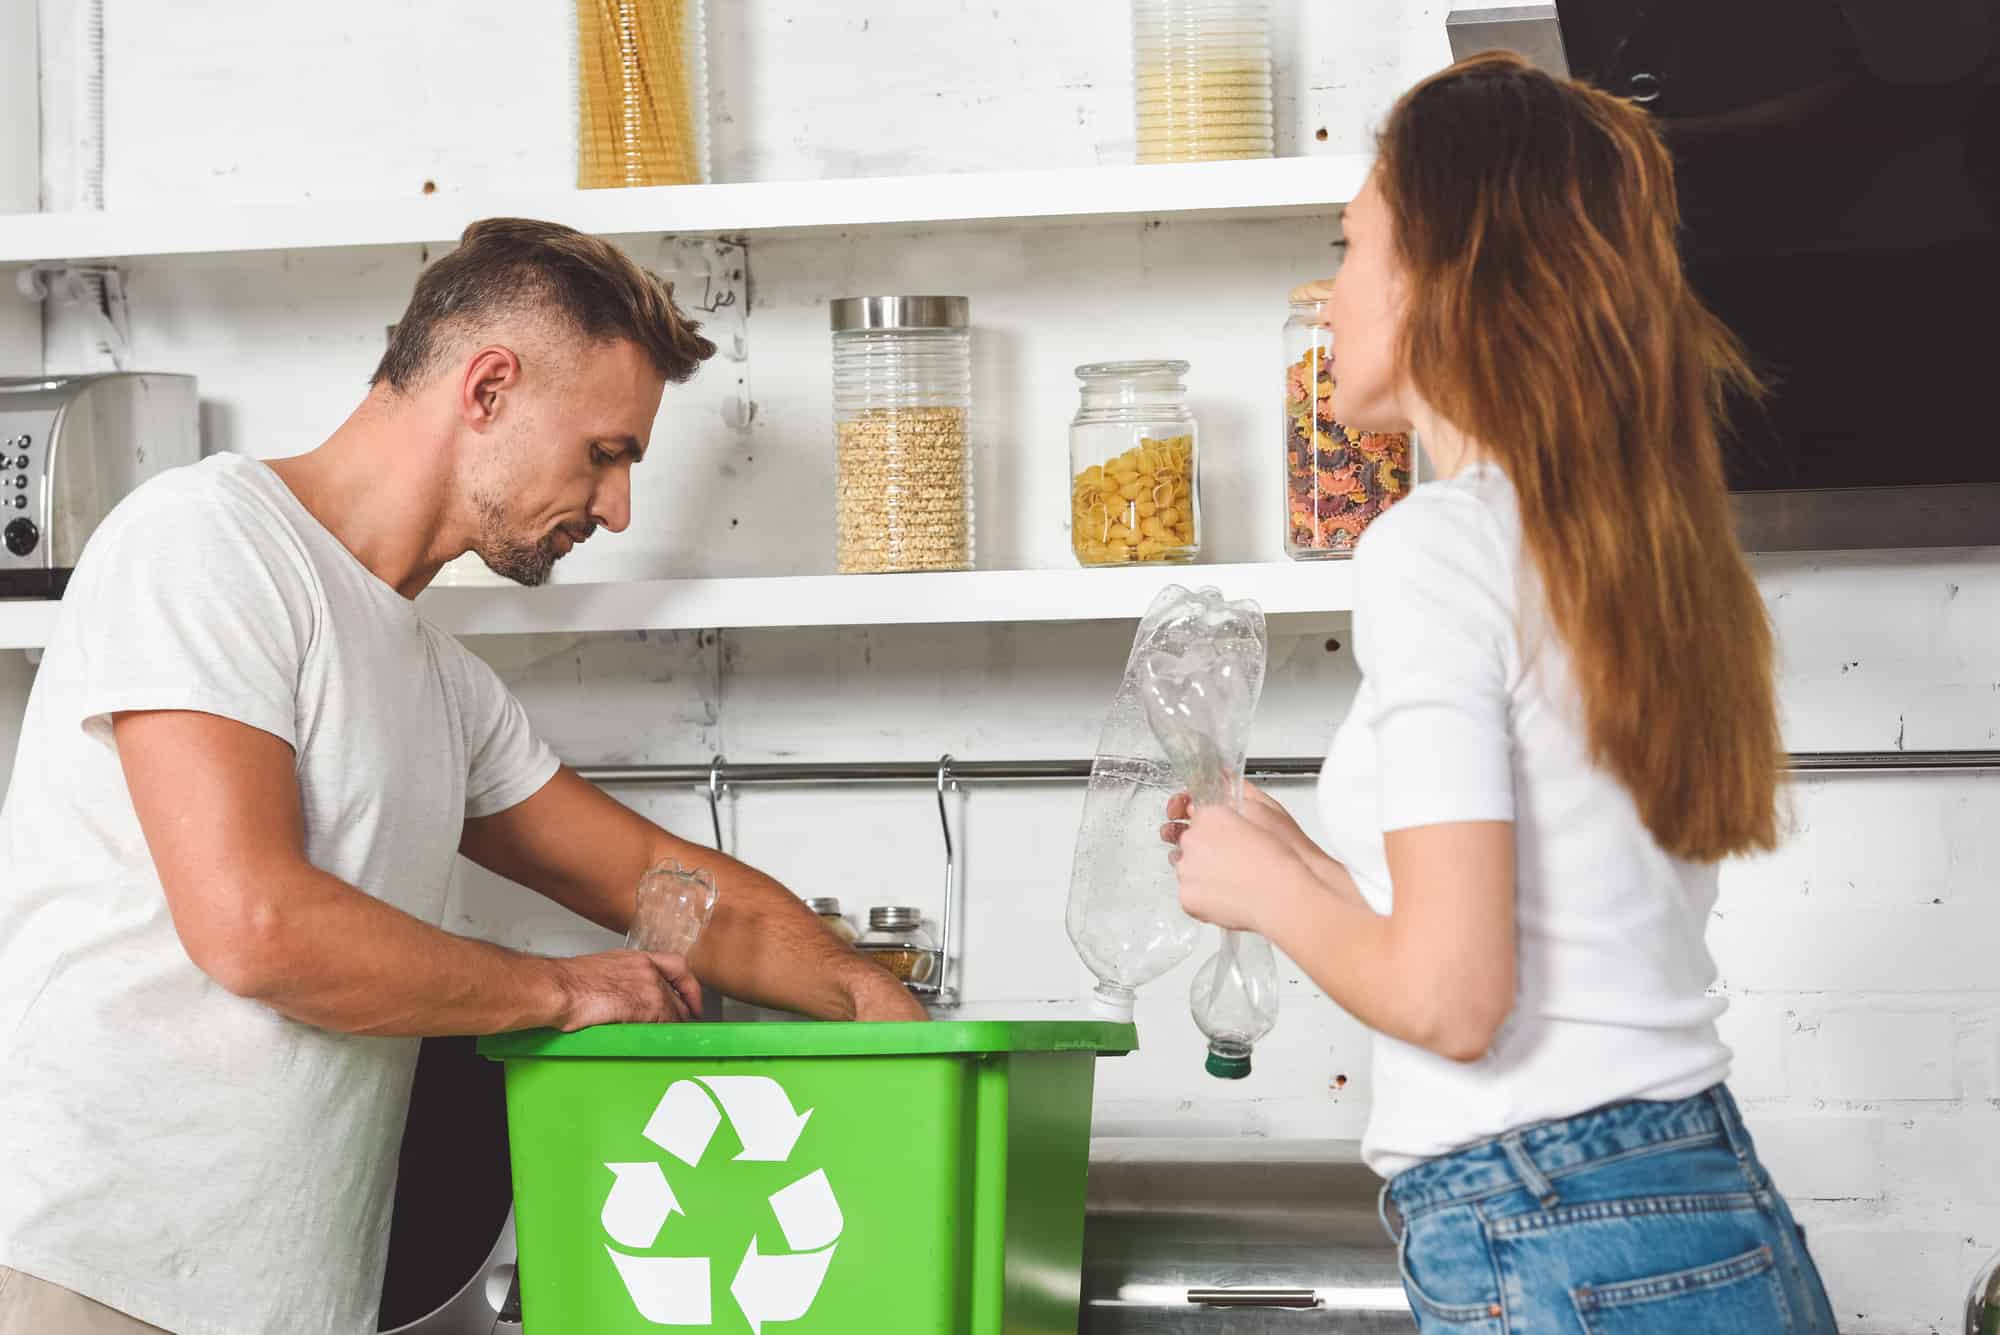 A man and woman standing next to a recycling bin.